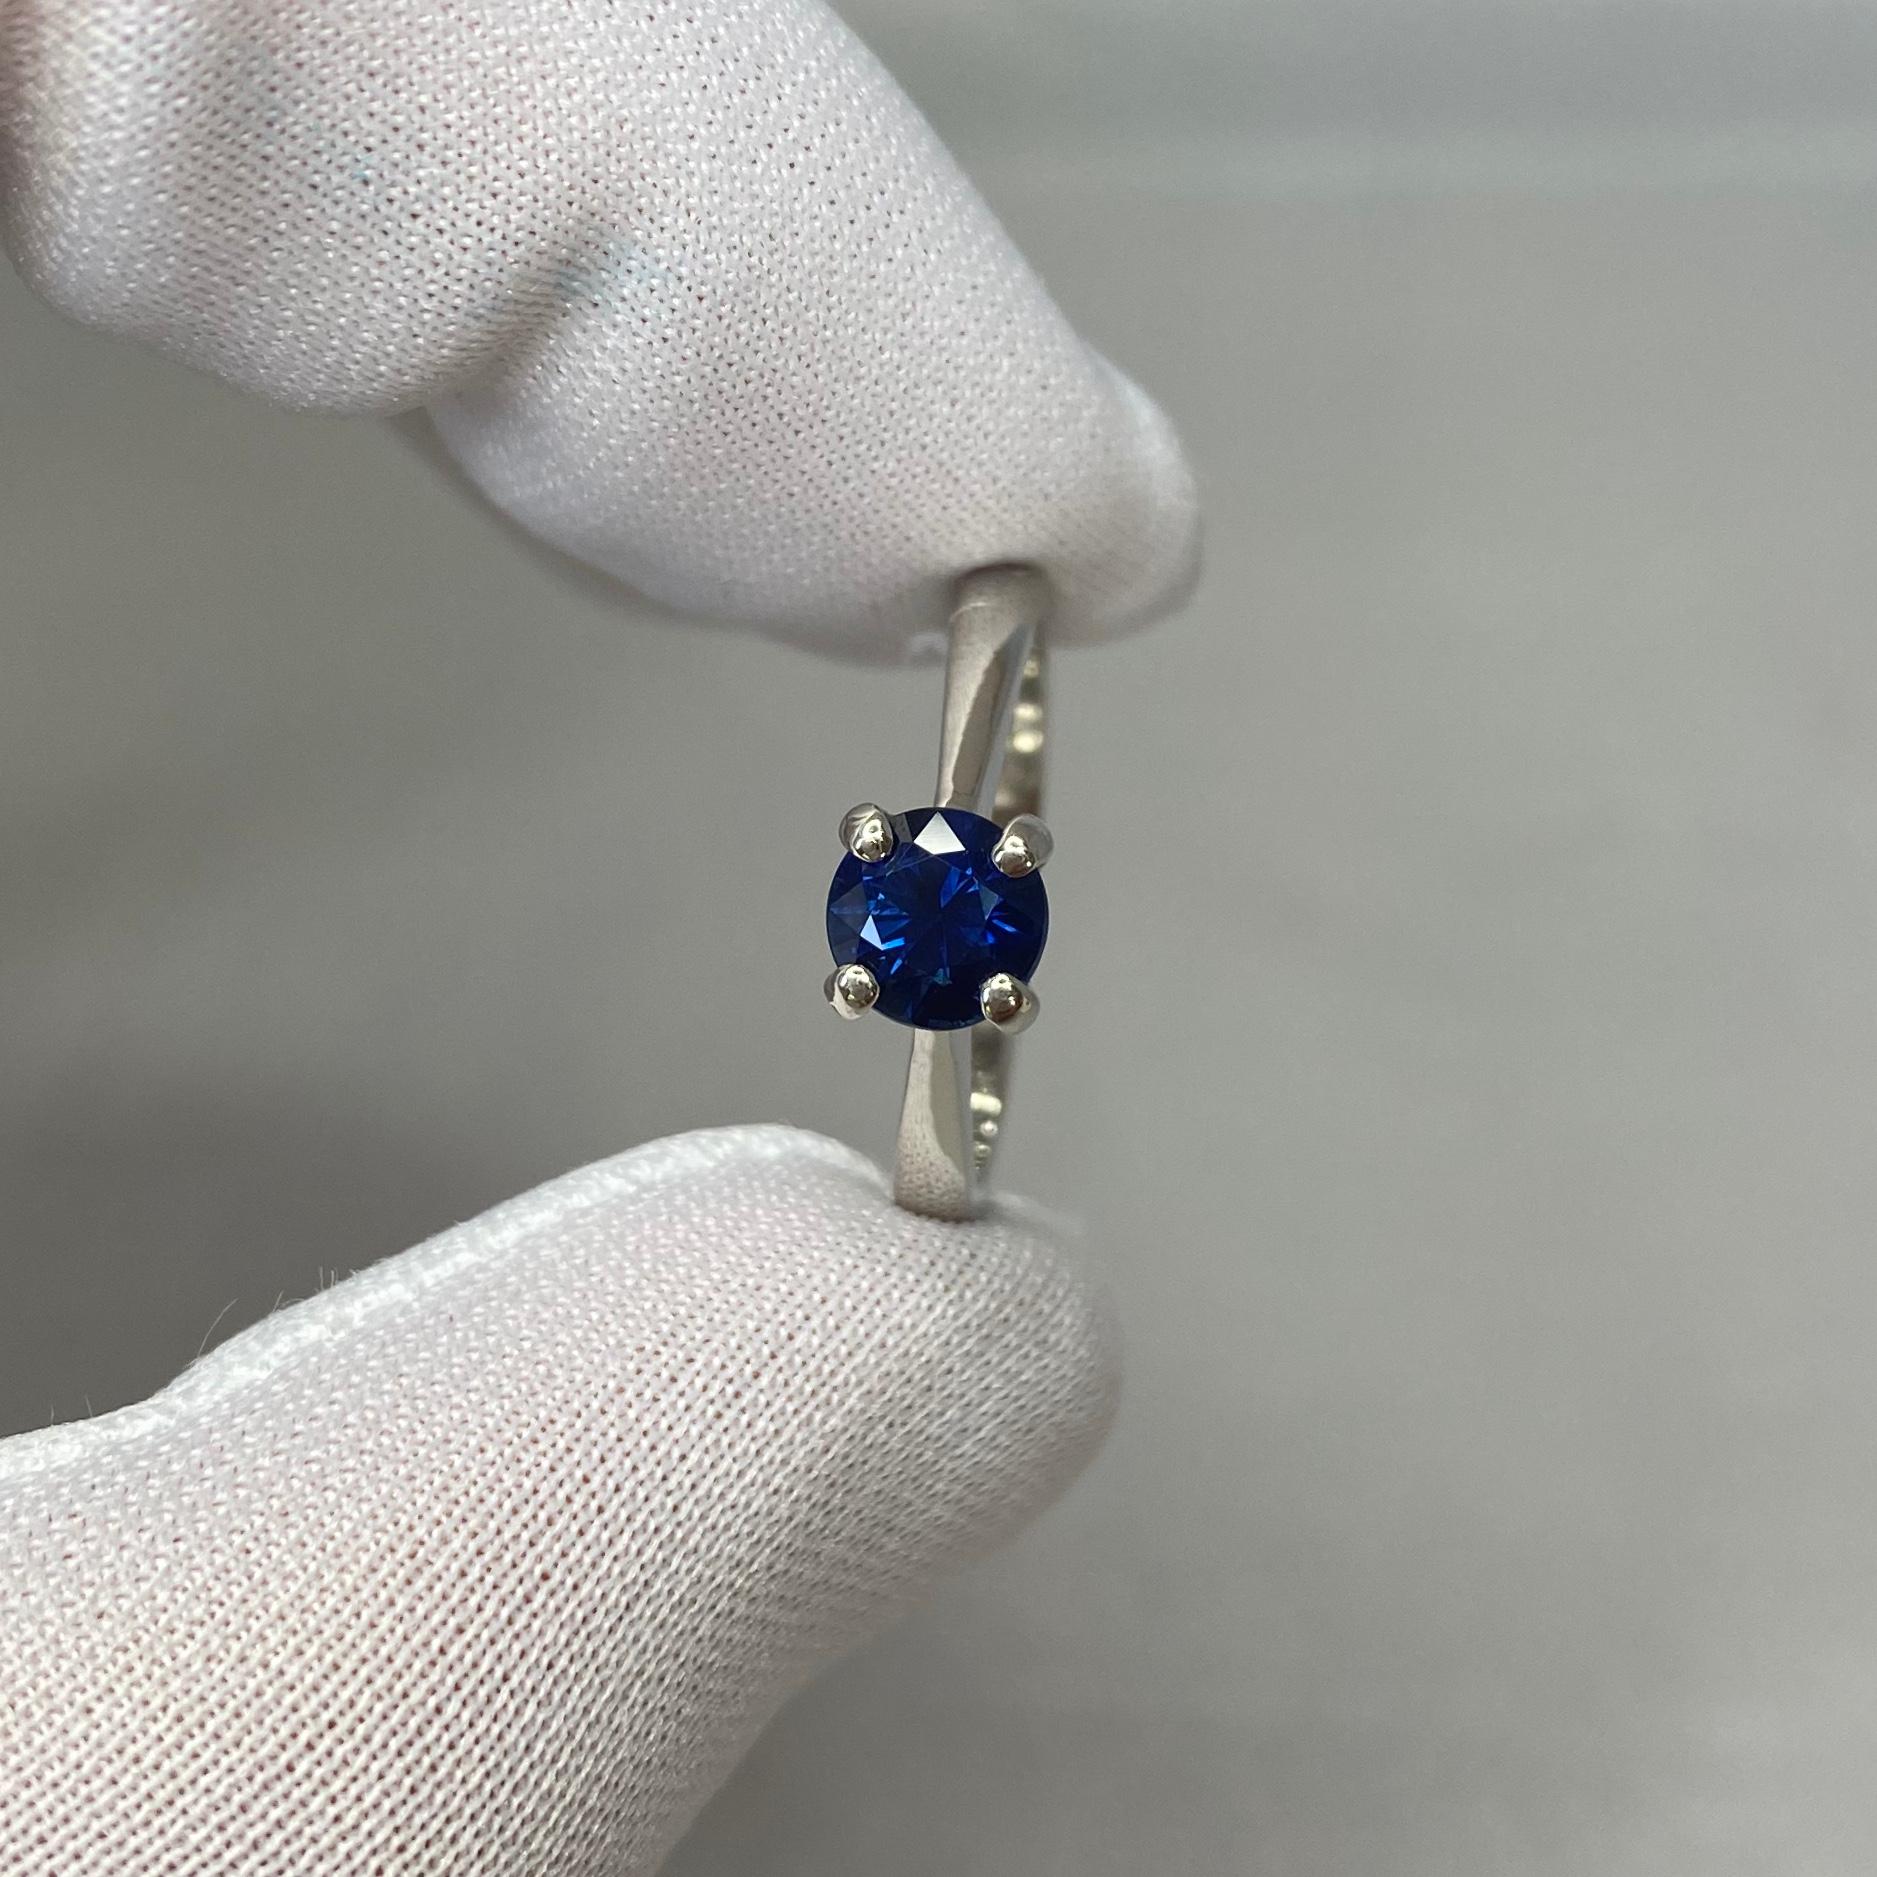 Natural deep blue Austrian sapphire set in a beautiful 950 platinum solitaire ring.

1.02 carat stone with a deep blue colour and good clarity, a clean stone with only minimal inclusions visible when looking closely.

Has a very good cut which shows